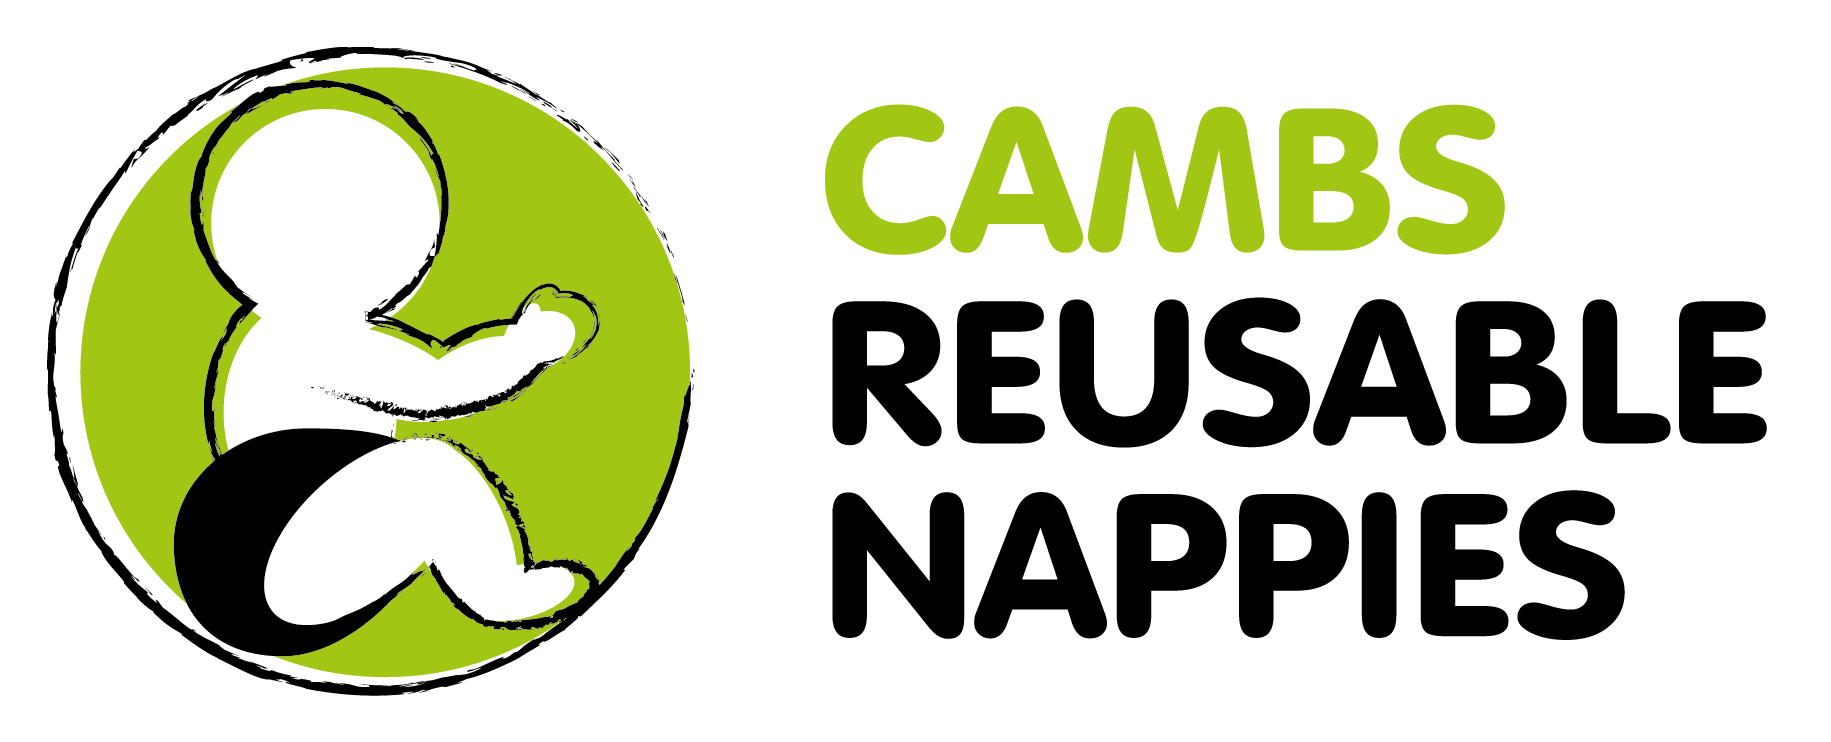 Cambridgeshire Reusable Nappies logo showing stylised baby in nappy